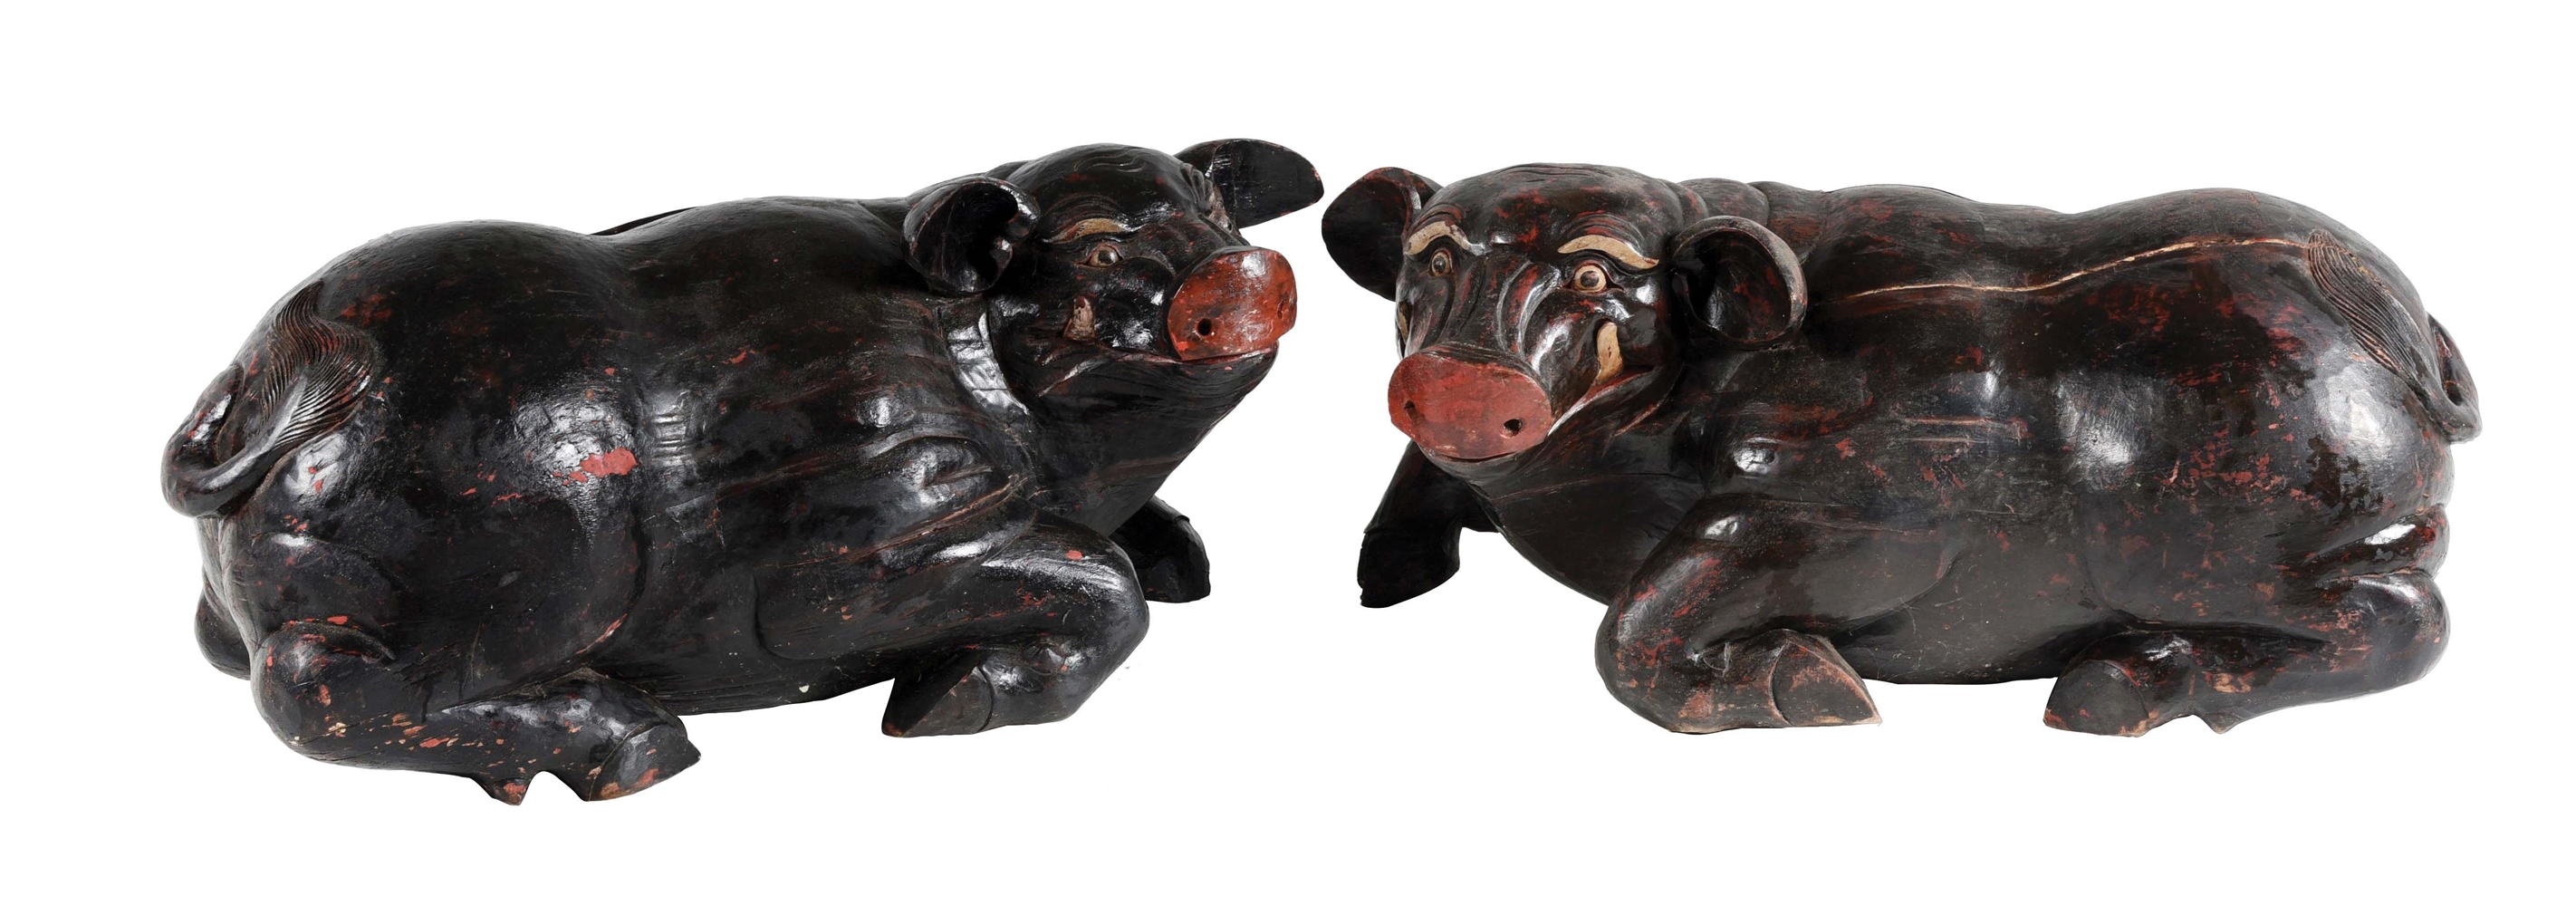 PAIR OF CARVED LIFE SIZE WOOD PIG STATUES WITH COMPARTMENTS. 